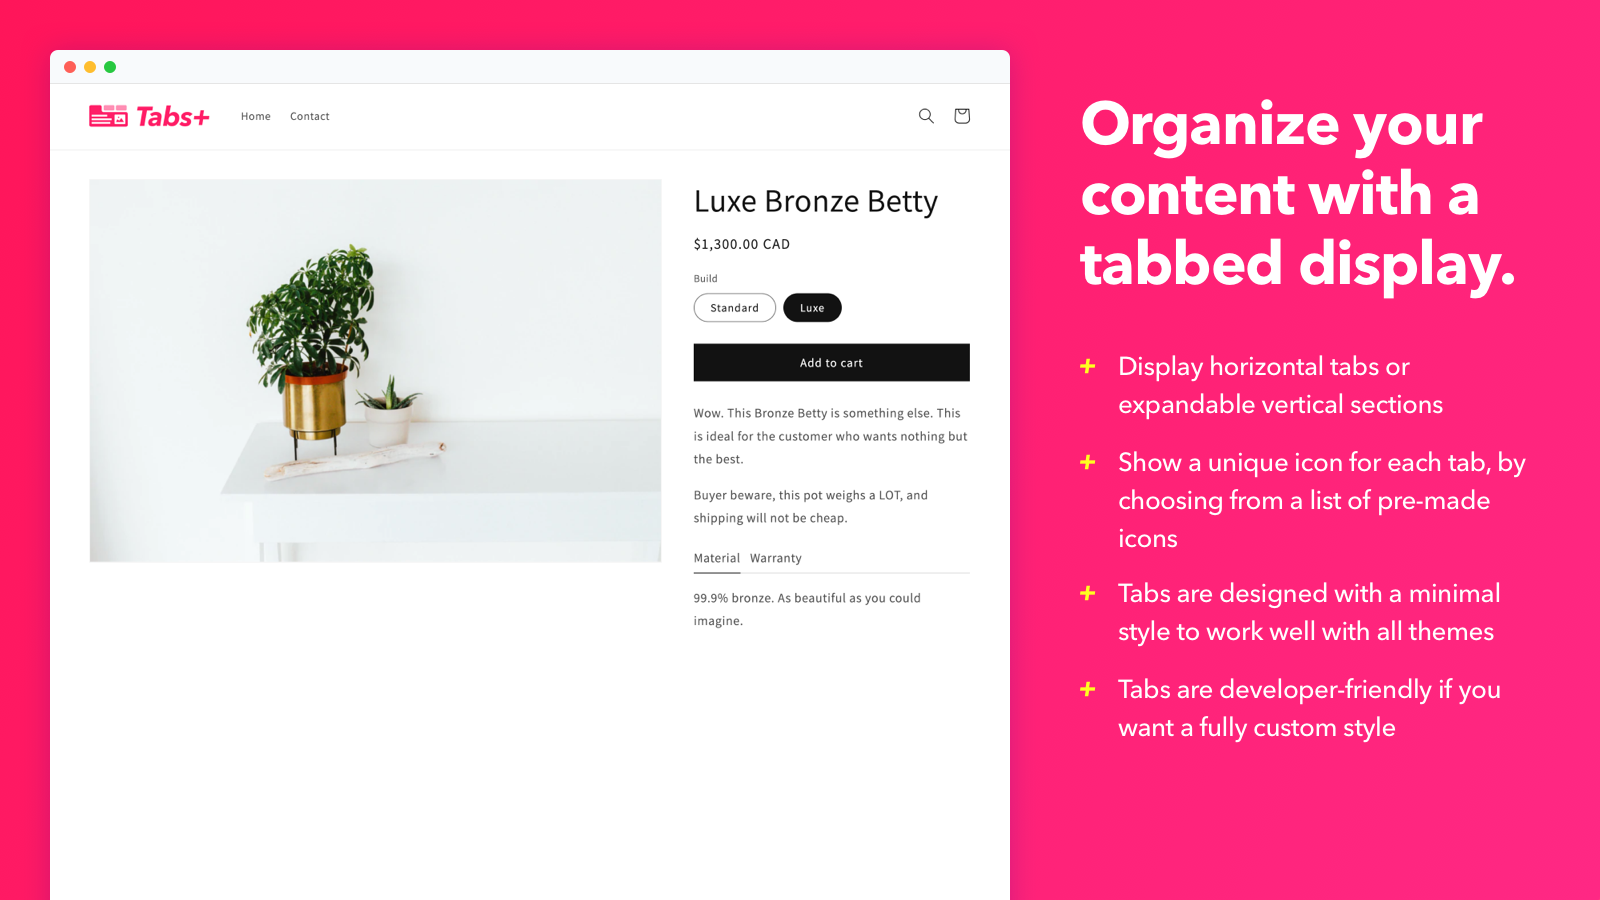 Organize your content with a tabbed display using tab templates